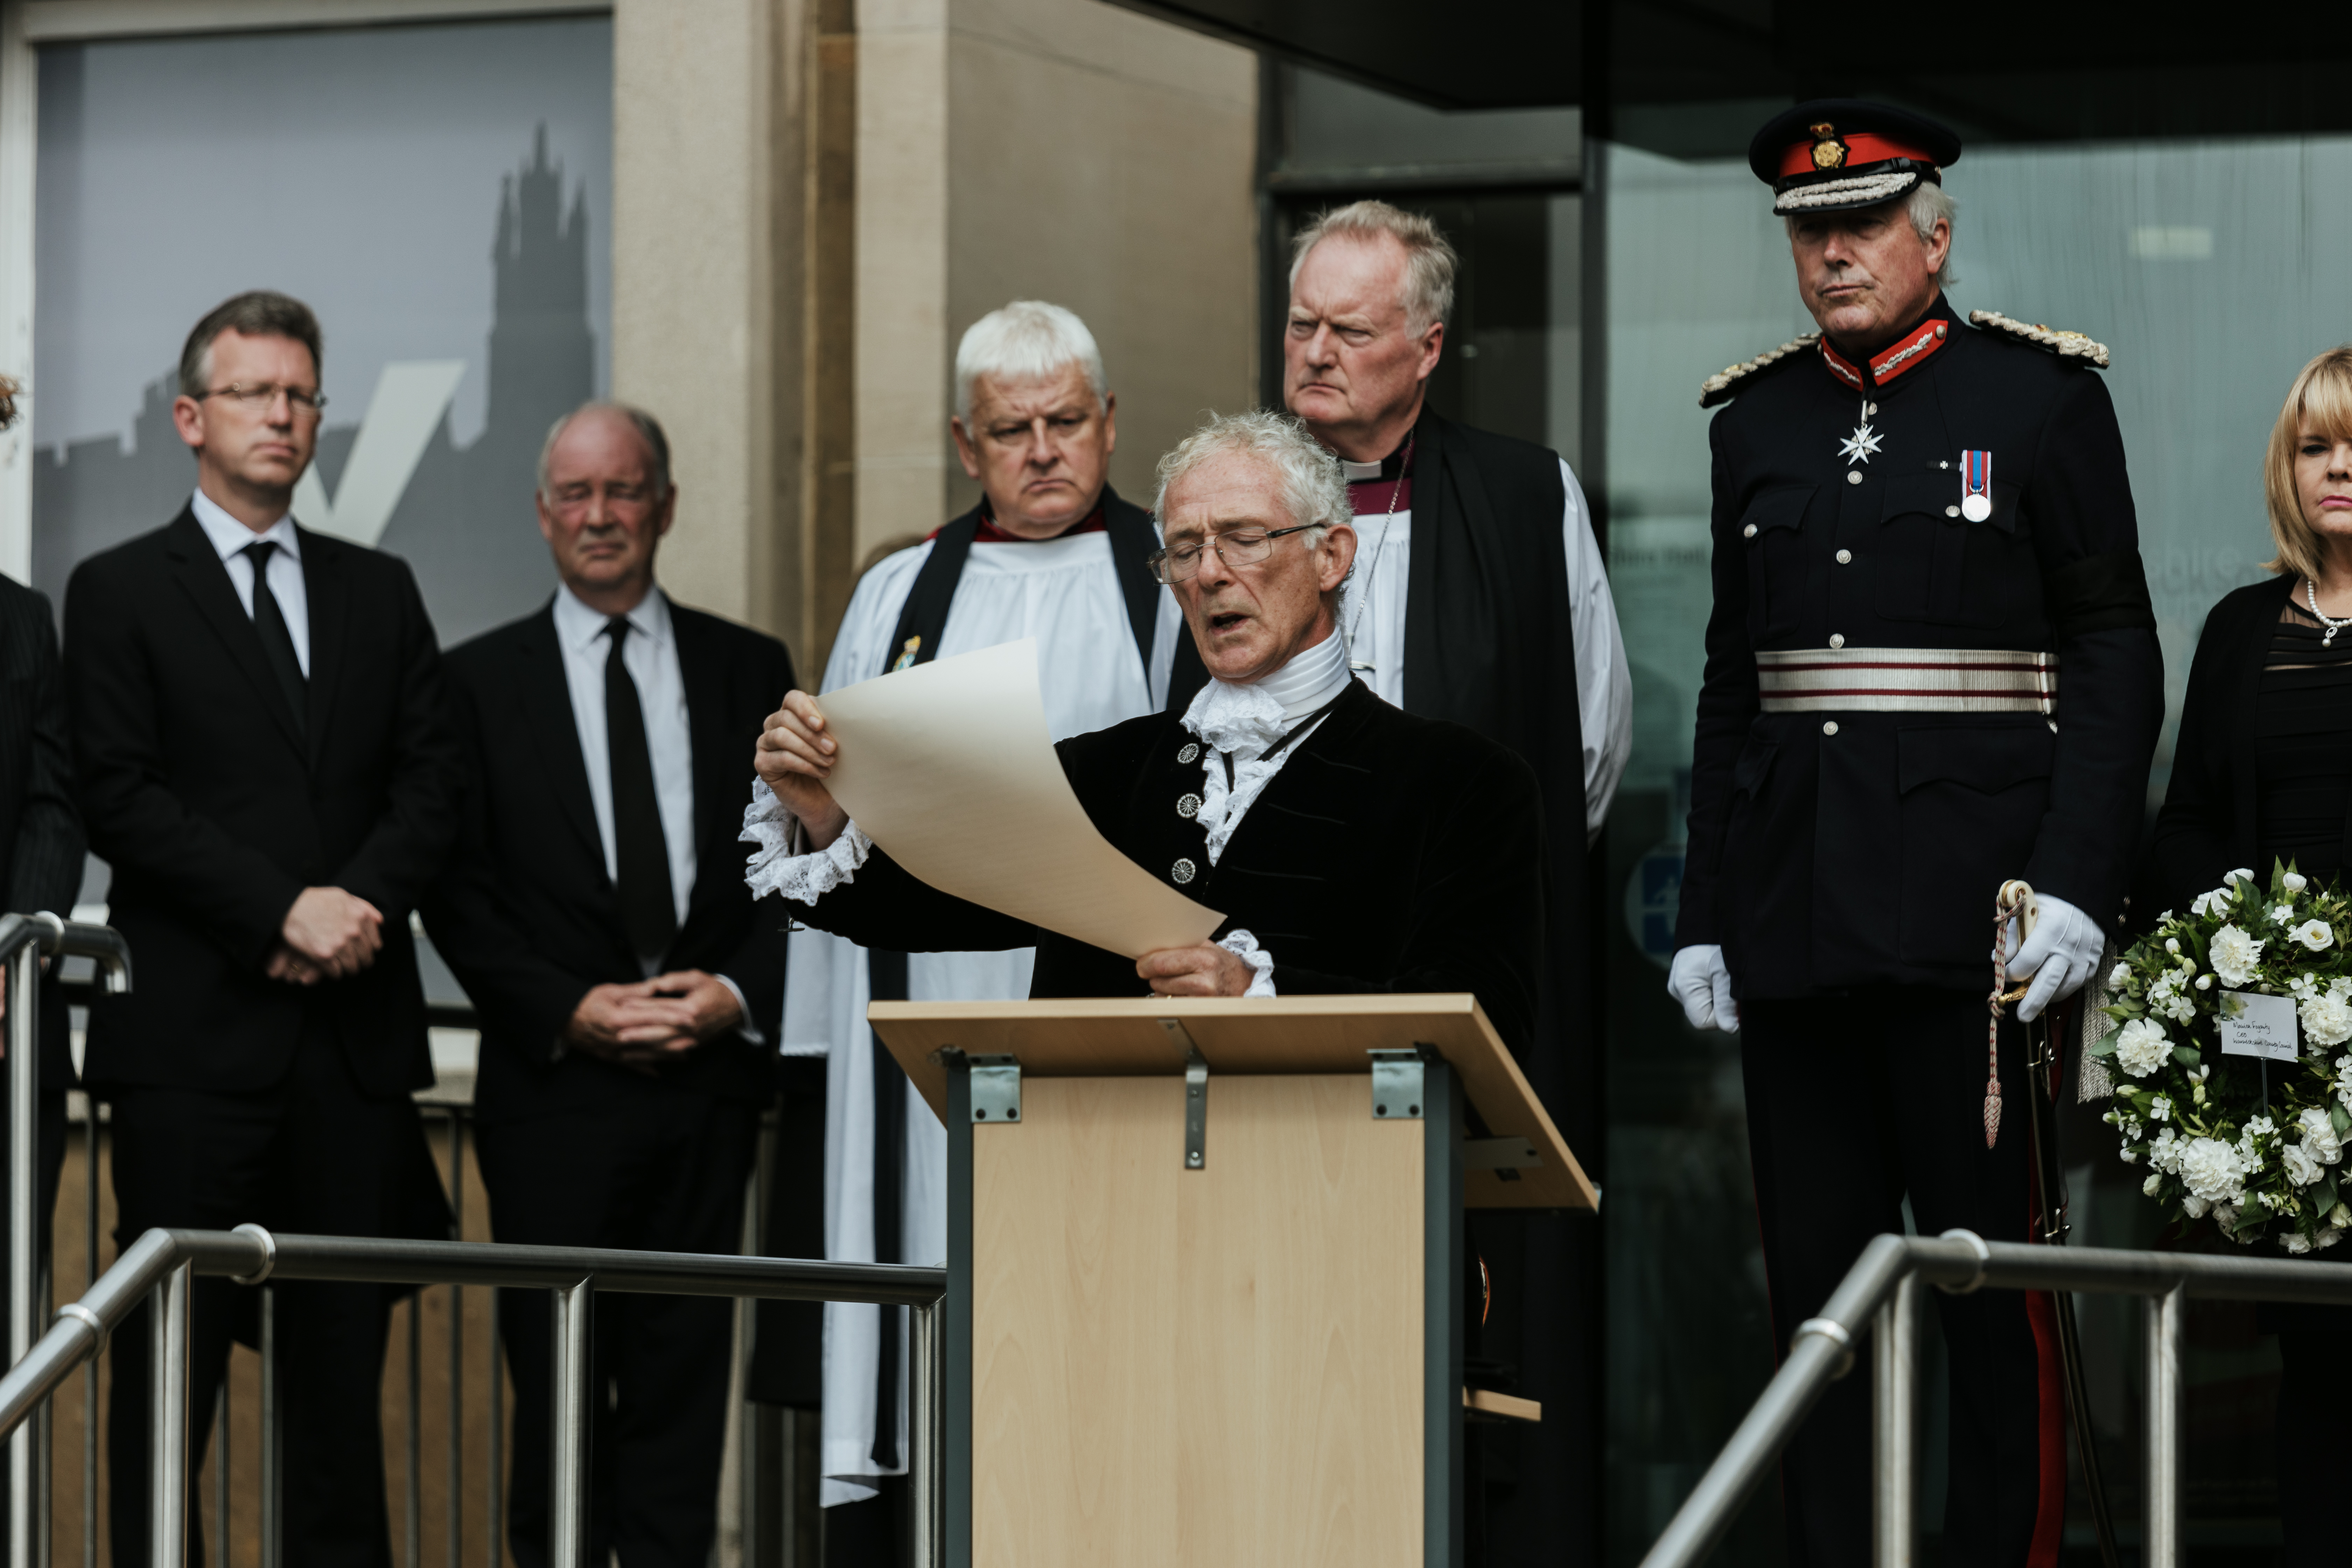 Reading of Proclamation